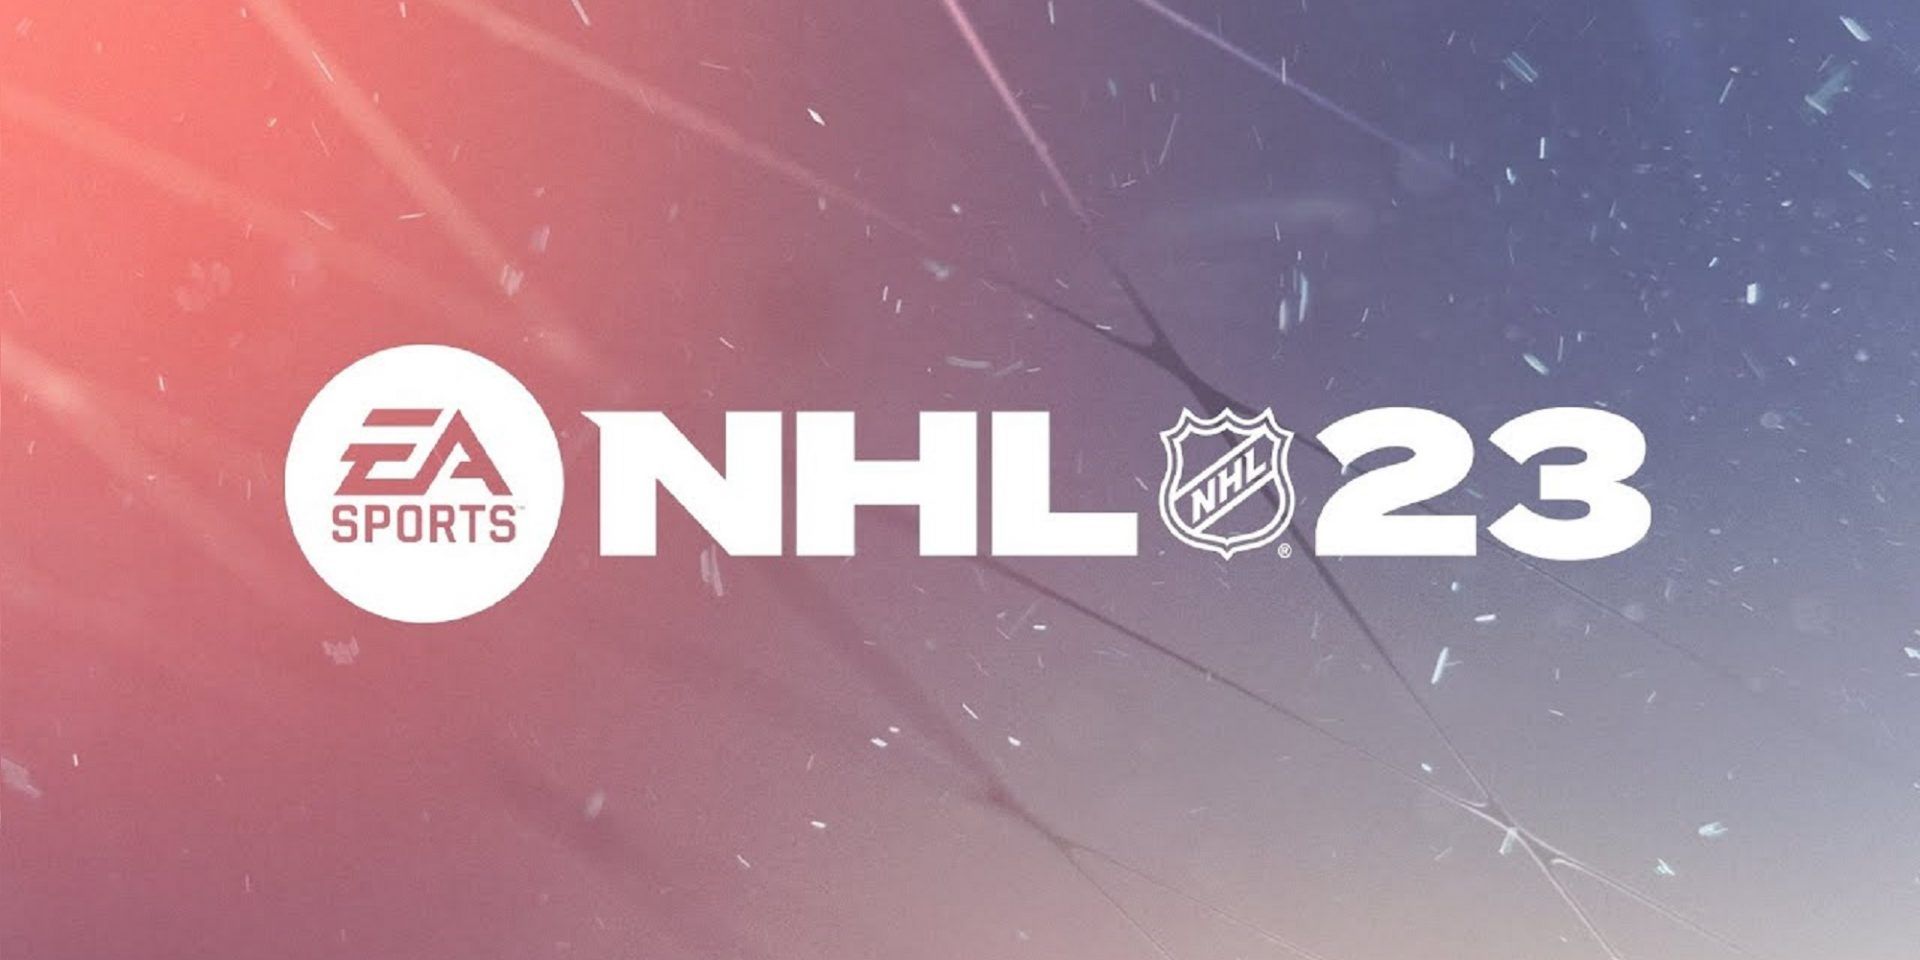 NHL 23 needs a logo selection update… here's my idea. Tell me what